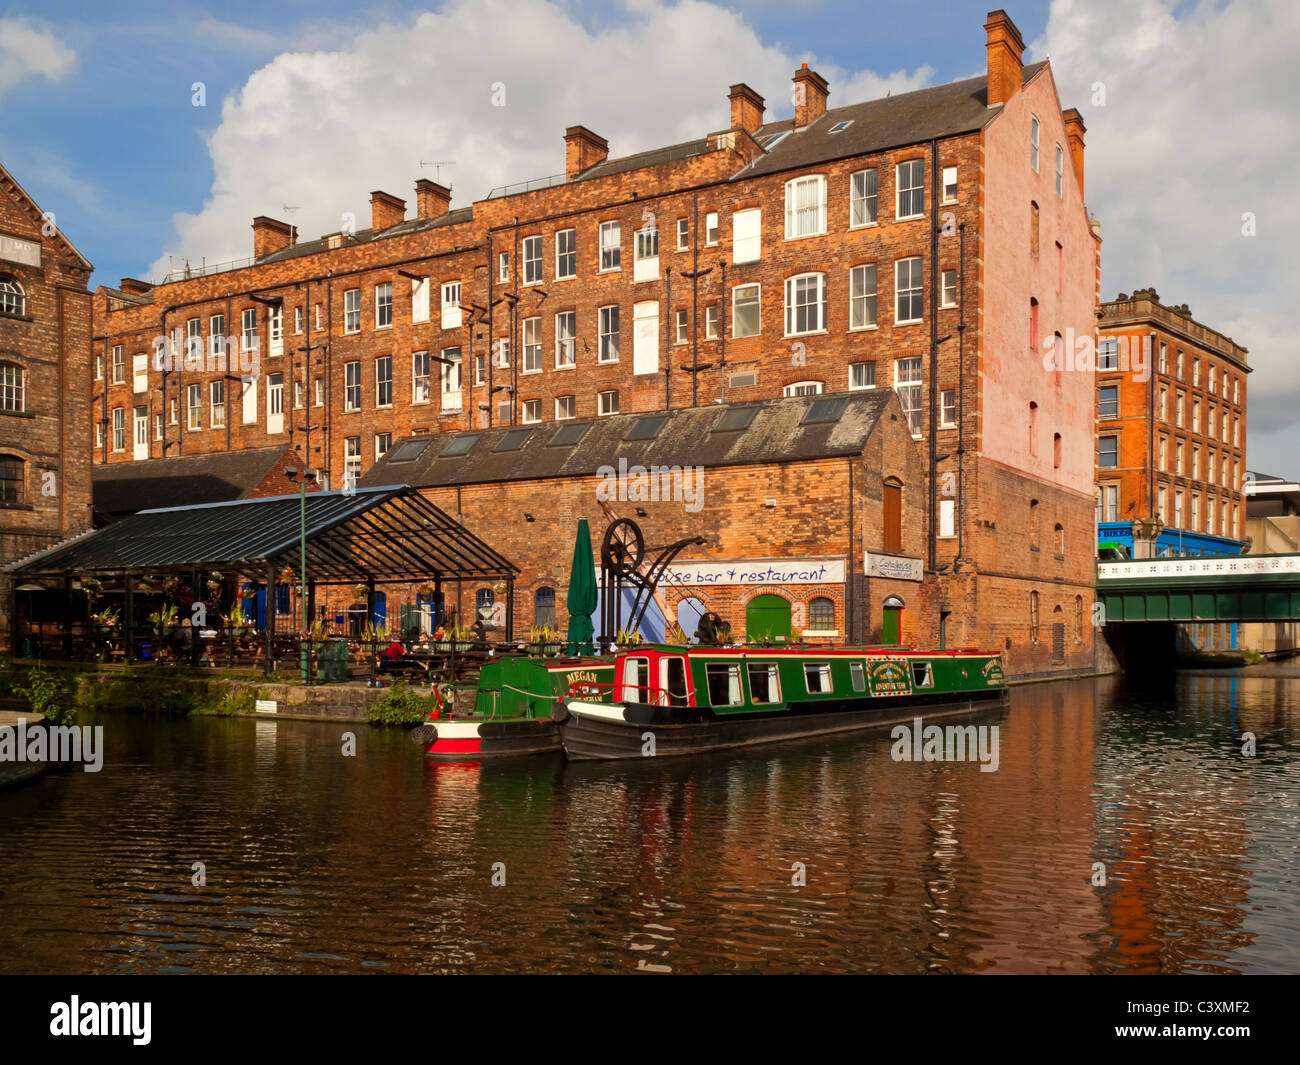 Green barge in Nottingham city centre canal England UK Stock Photo